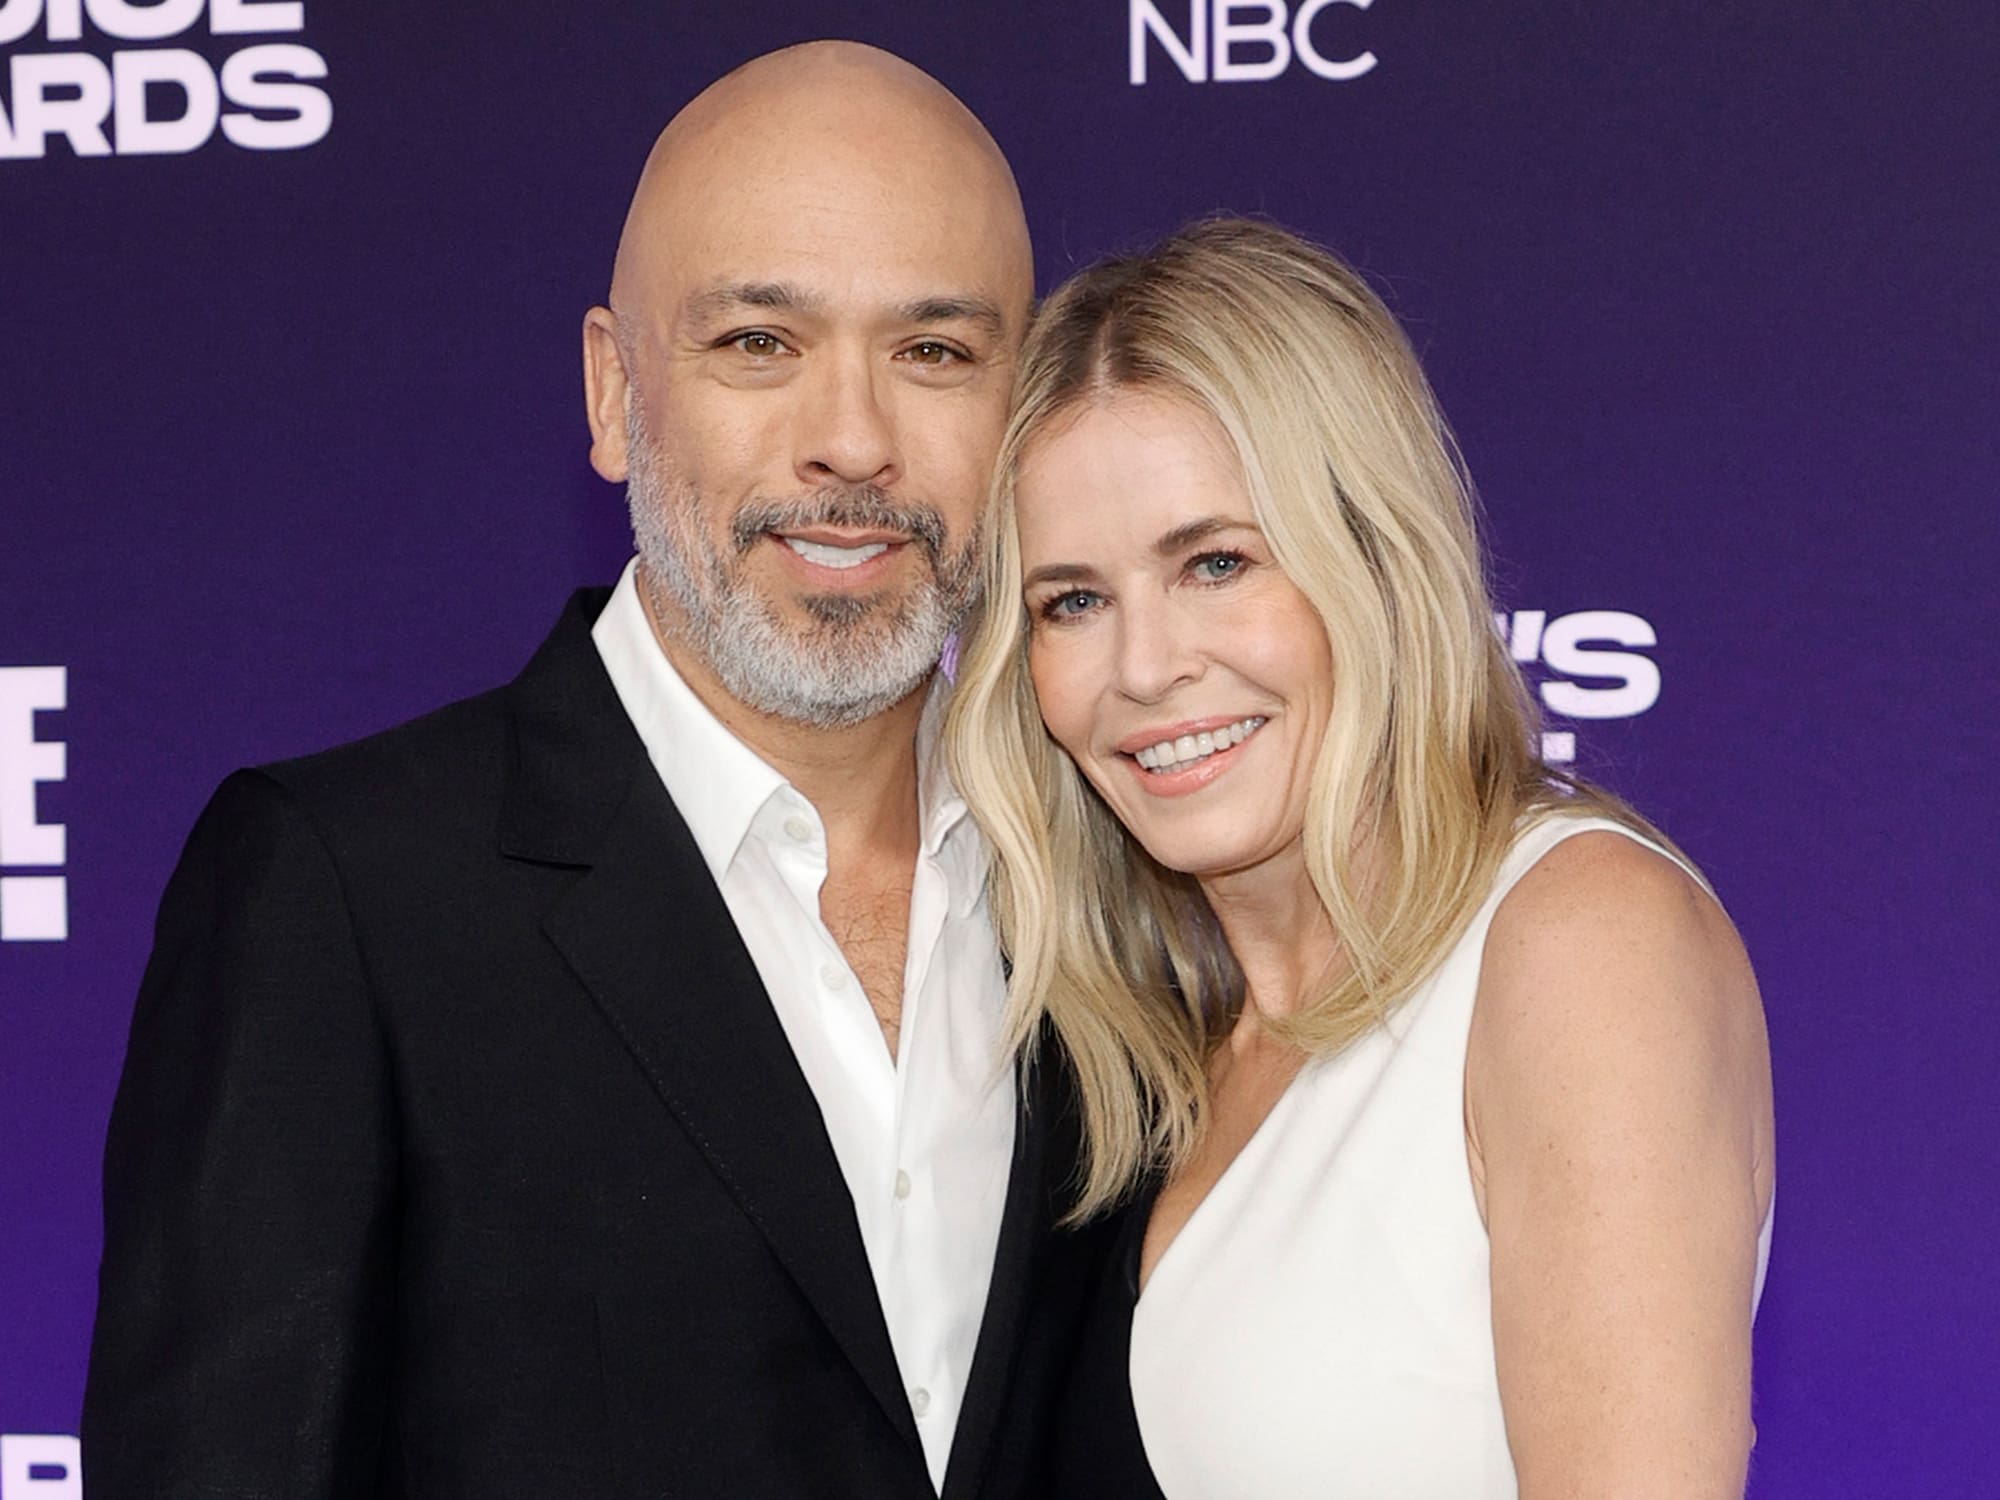 Chelsea Handler Feels She Could Only Do So Much For Jo Koy Before Their Breakup